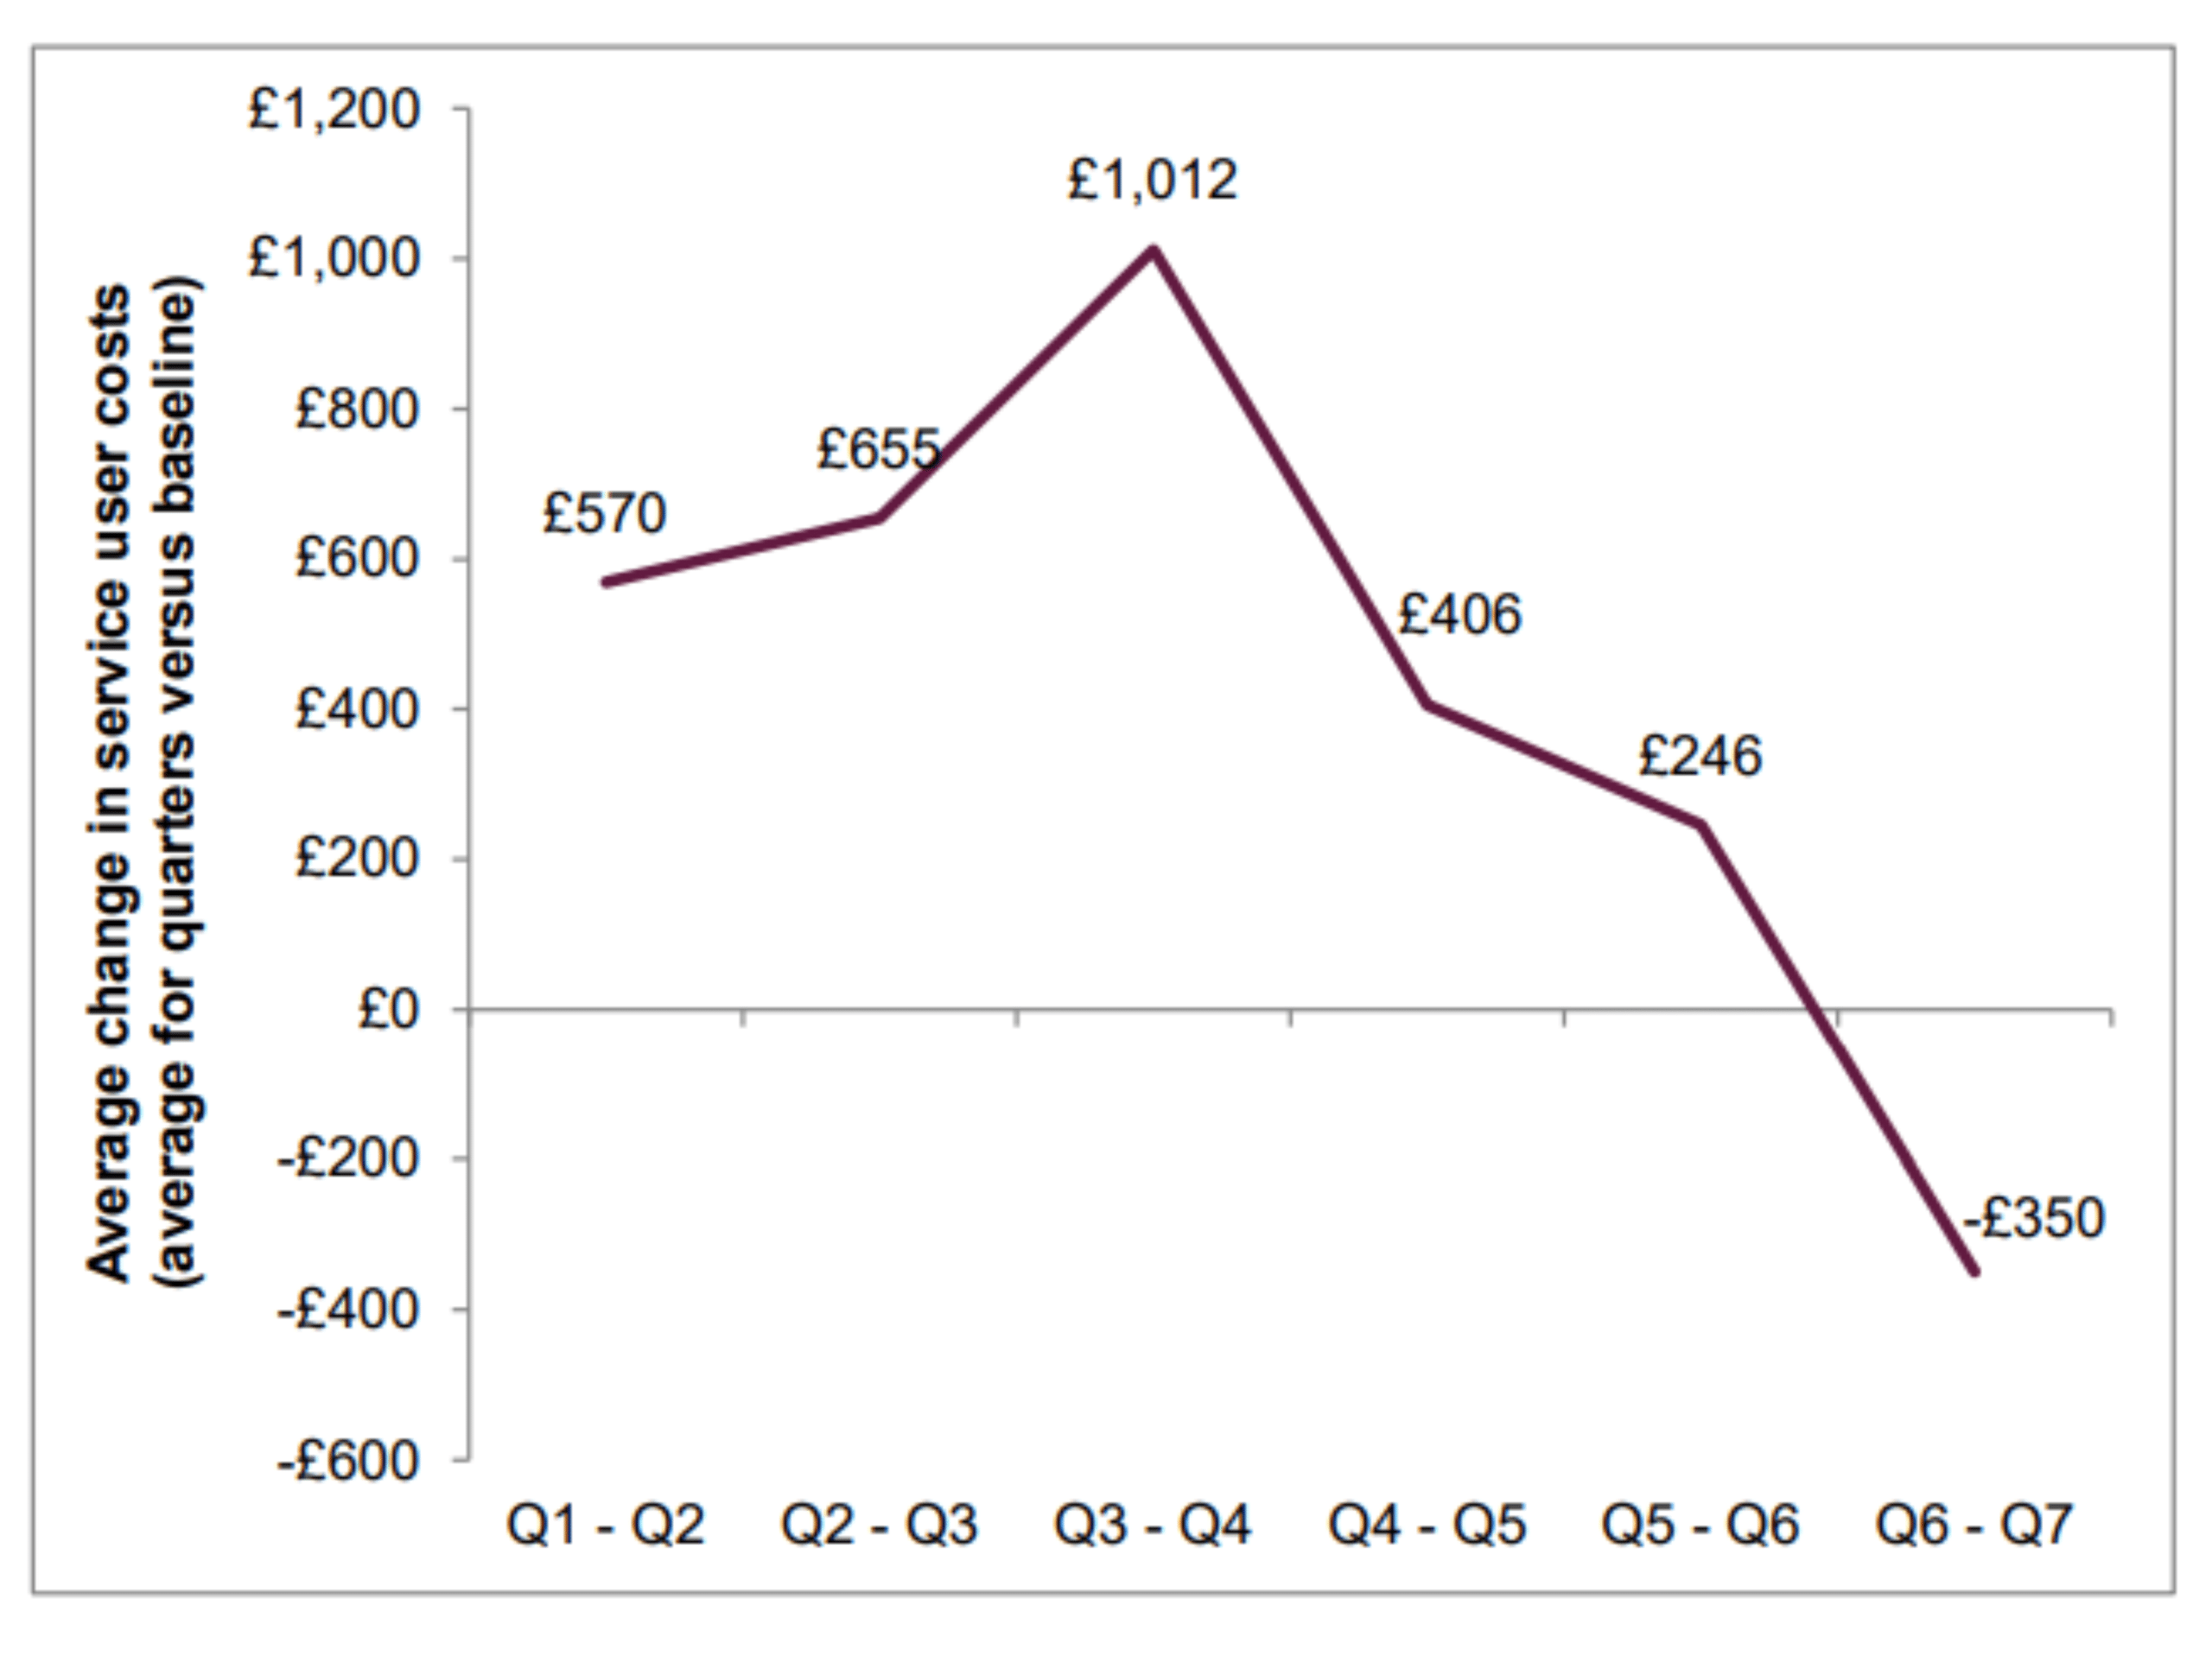 Change in average service use costs per beneficiary over time. Line graph that shows how average change in service user costs increases in the first year before significantly decreasing , on average from £570 in Q1 to -£350 in Q7. An overall saving.